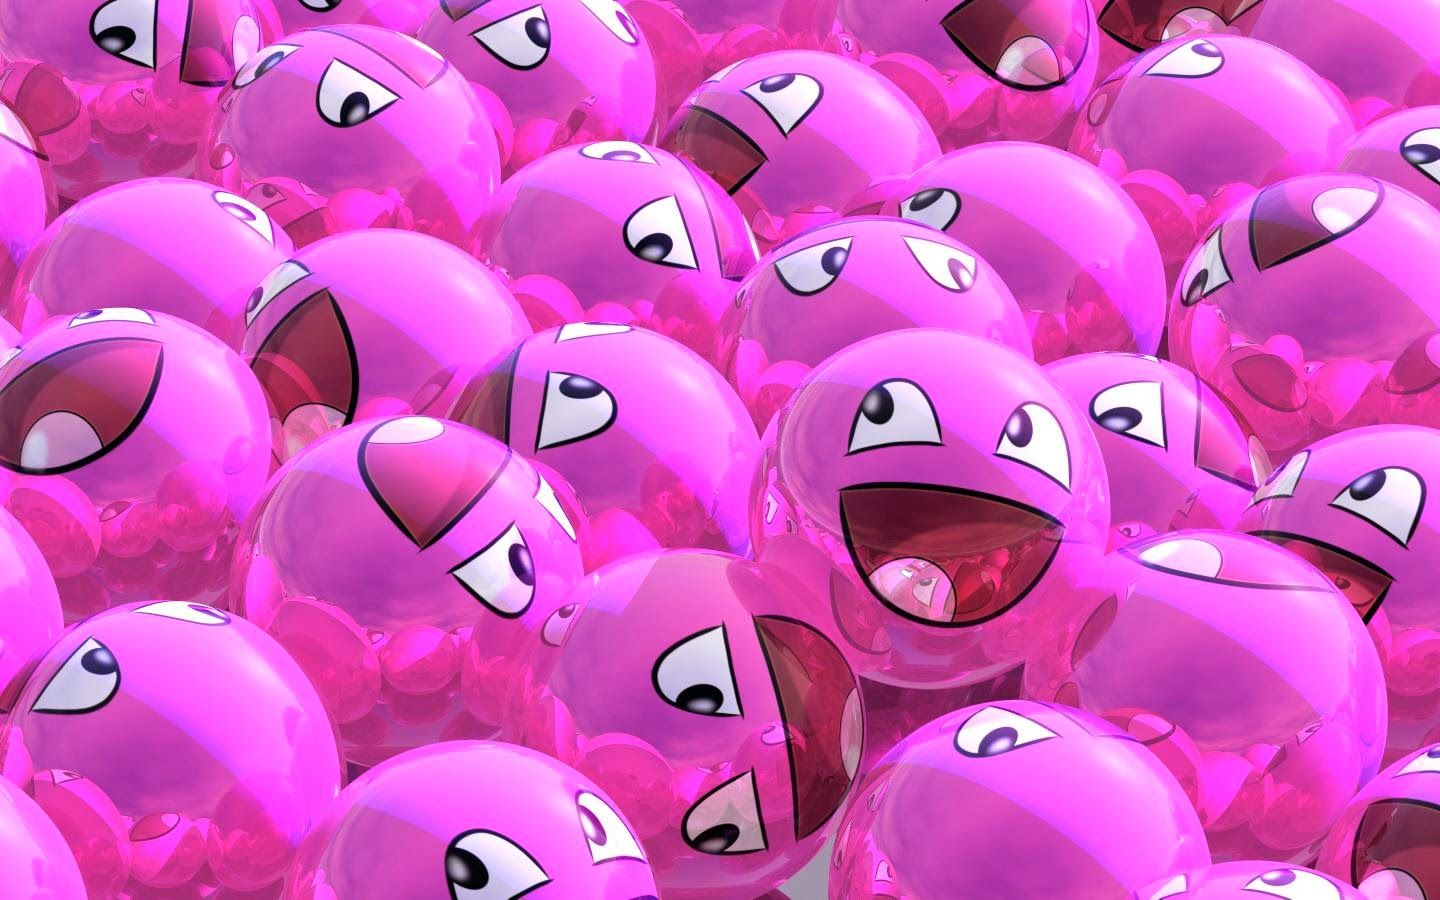 Pink Smiley Faces Wallpaper Wallpapers9